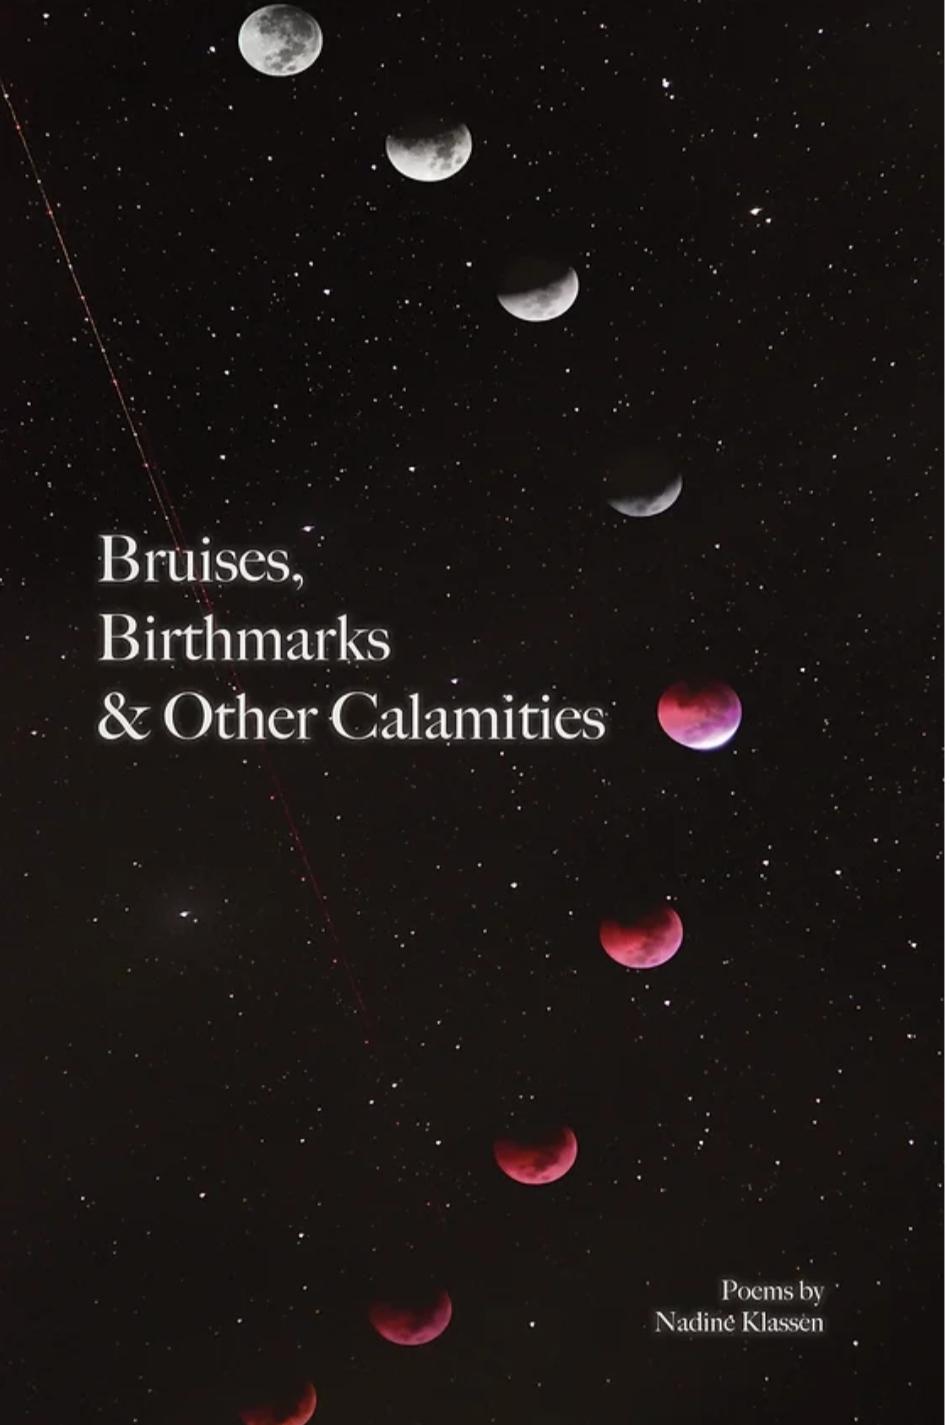 Book cover of Bruises, Birthmarks & Other Calamities  by nadinehitchiner